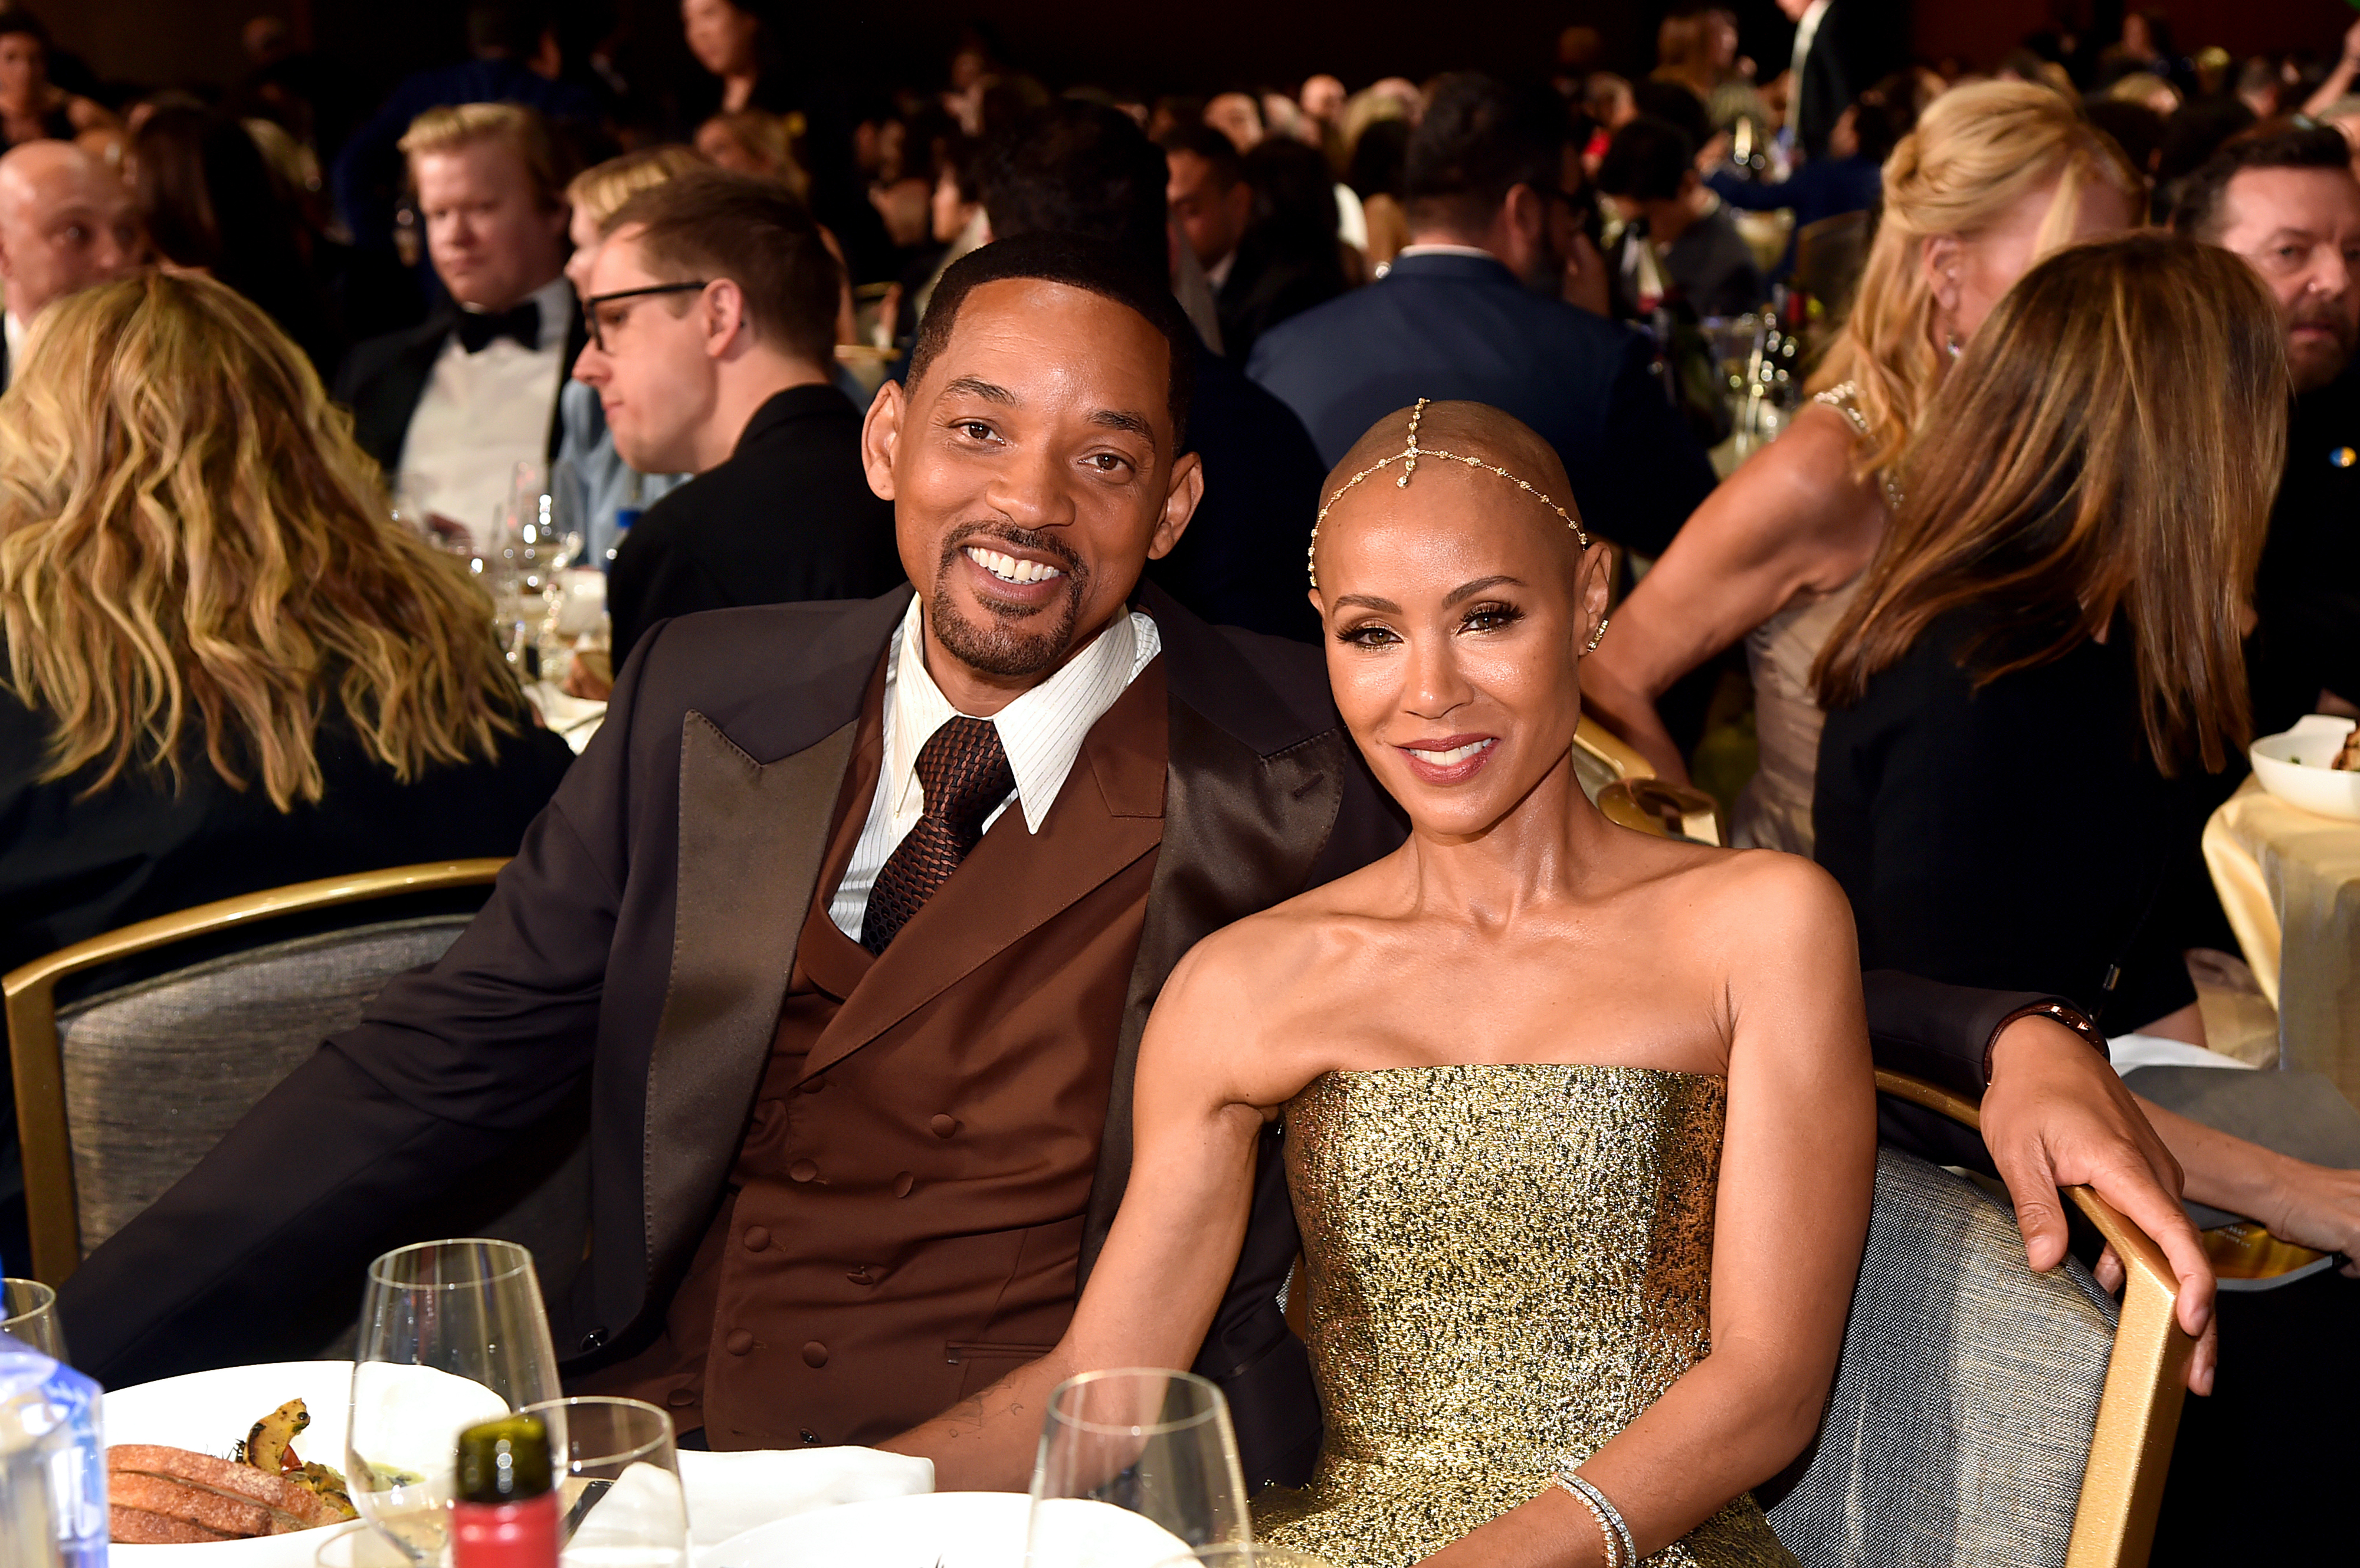 Will and Jada seated at an event, smiling; he&#x27;s in a suit and tie, she&#x27;s in a glittering sleeveless dress